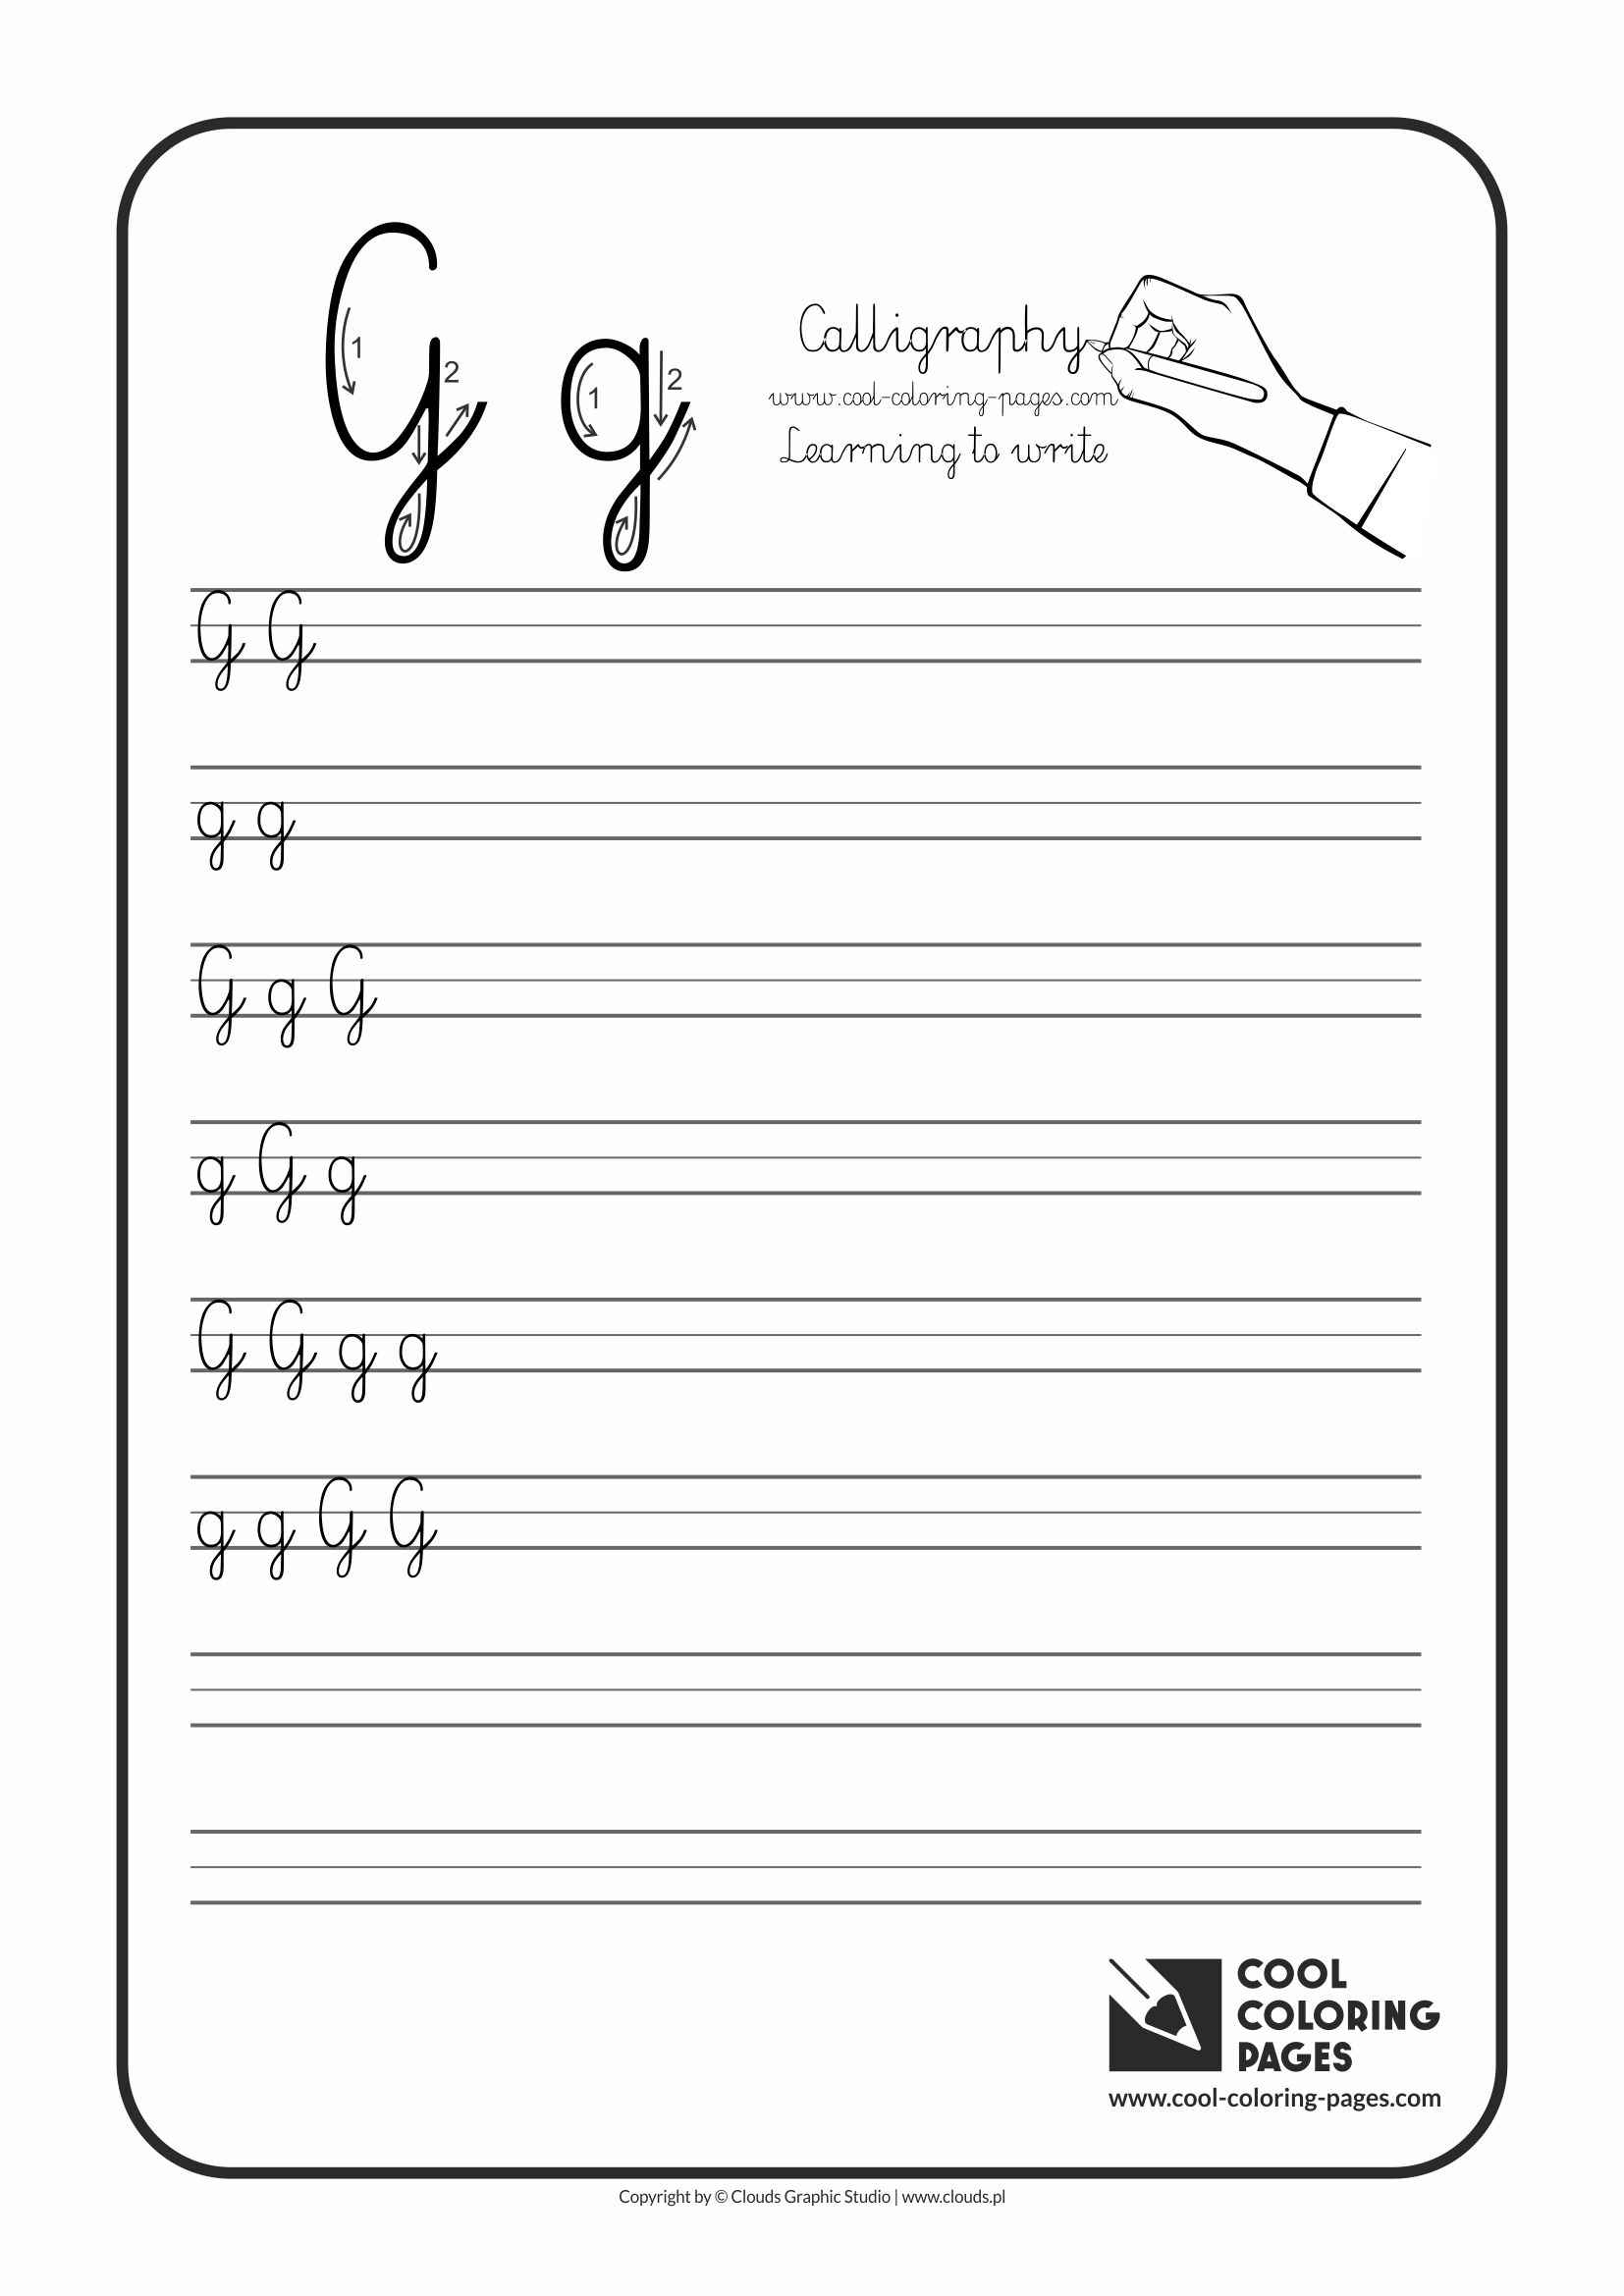 Cool Coloring Pages / Calligraphy / Letter G - Handwriting for kids / Worksheets